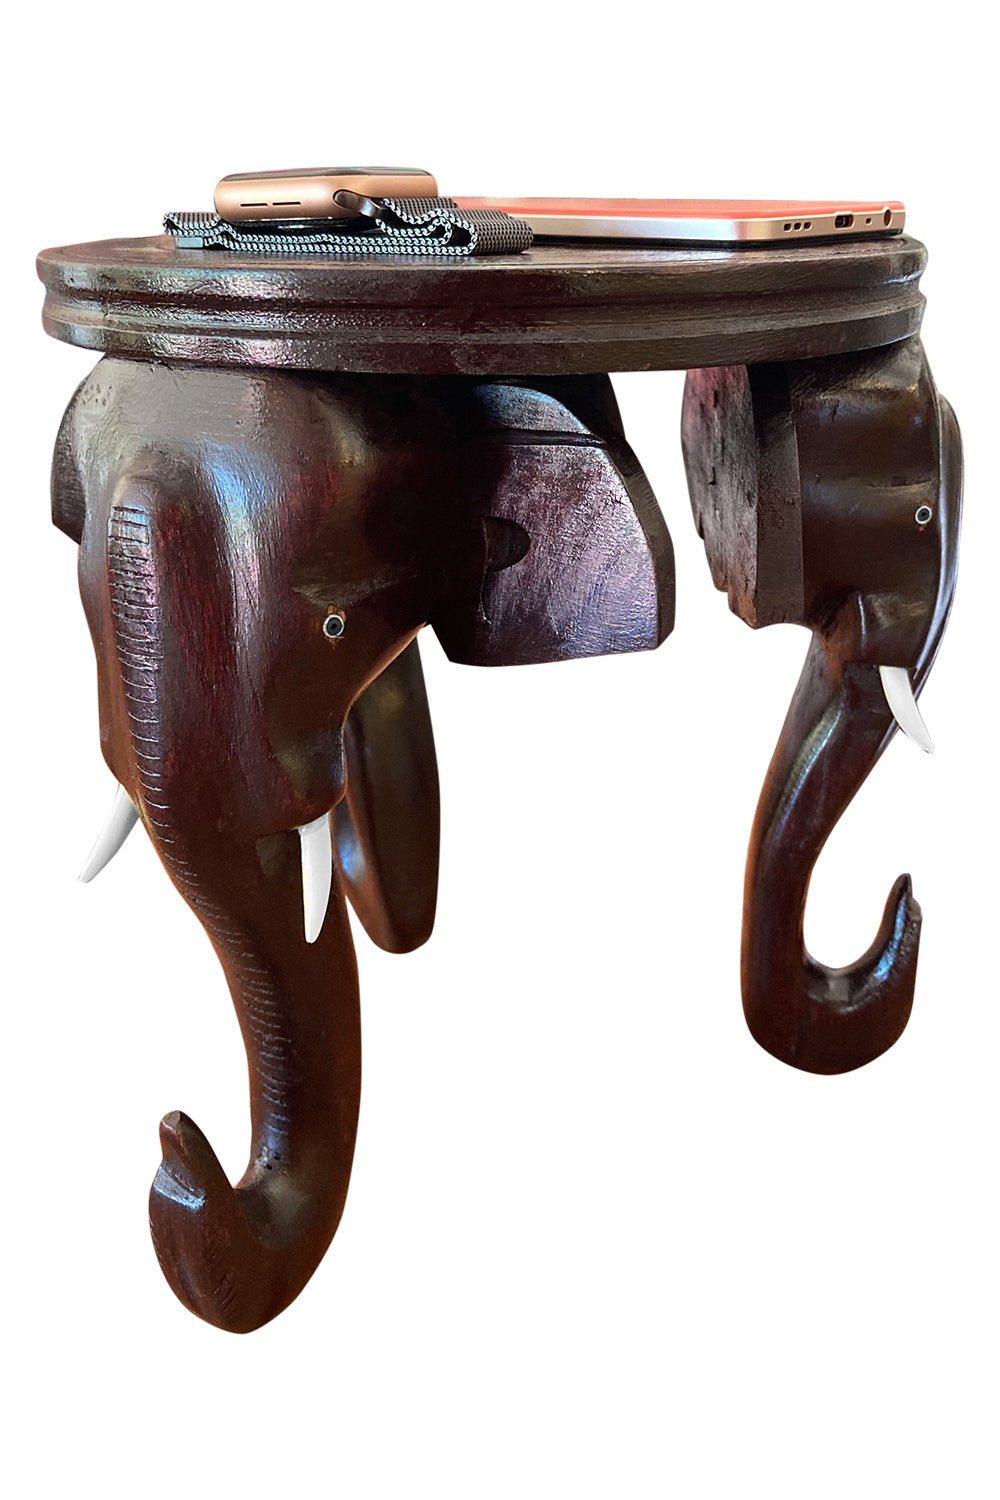 Southloom Handmade Elephant Head Flower Pot Stand Handicraft 9 inches (Carved from Mahogany Wood)